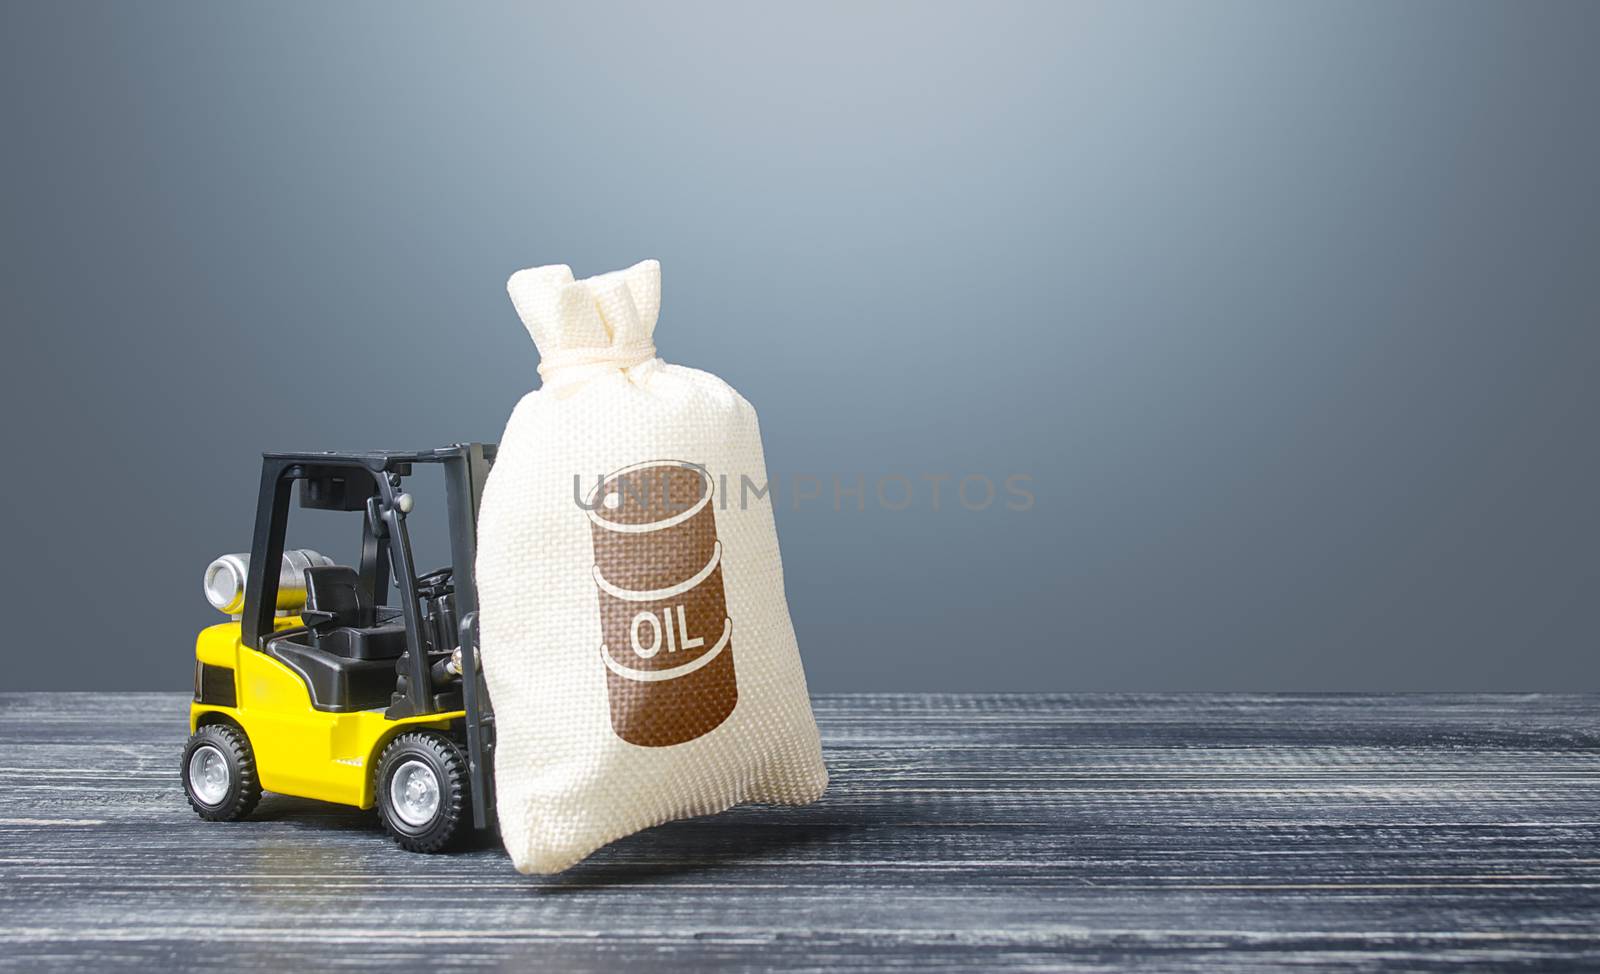 A forklift carries a bag with an oil barrel icon. Trade and transportation of oil. Buying futures for sale. Lack of storage space and oversupply. Low demand. Big discounts and deferred payments.